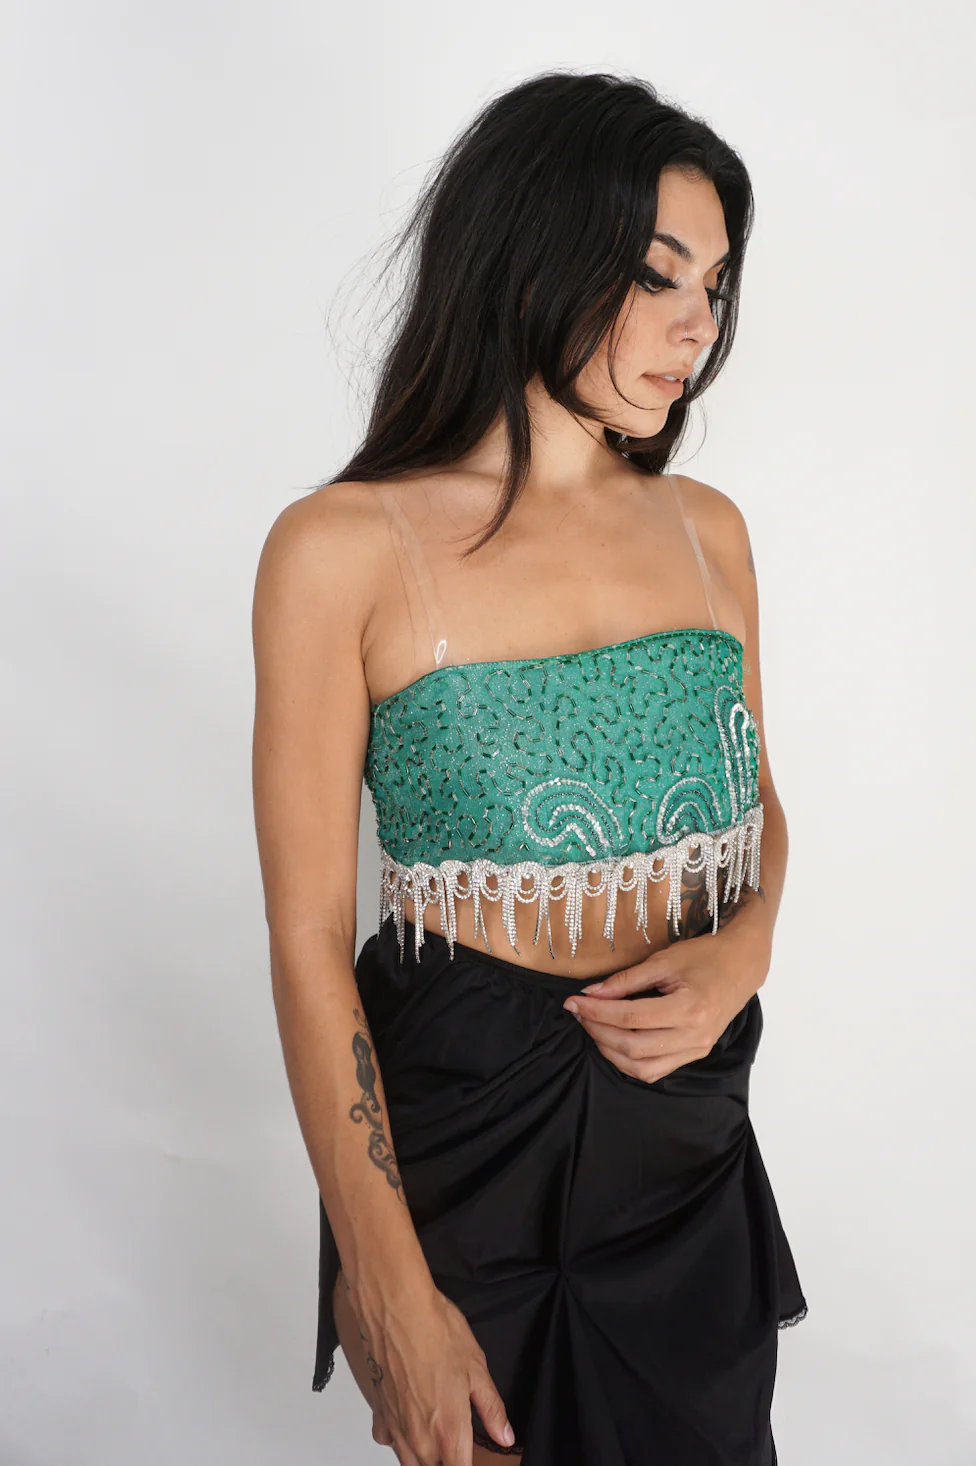 a woman wearing a Vintage Turquoise Shimmer and Crystal Fringe Bra Top and black skirt.